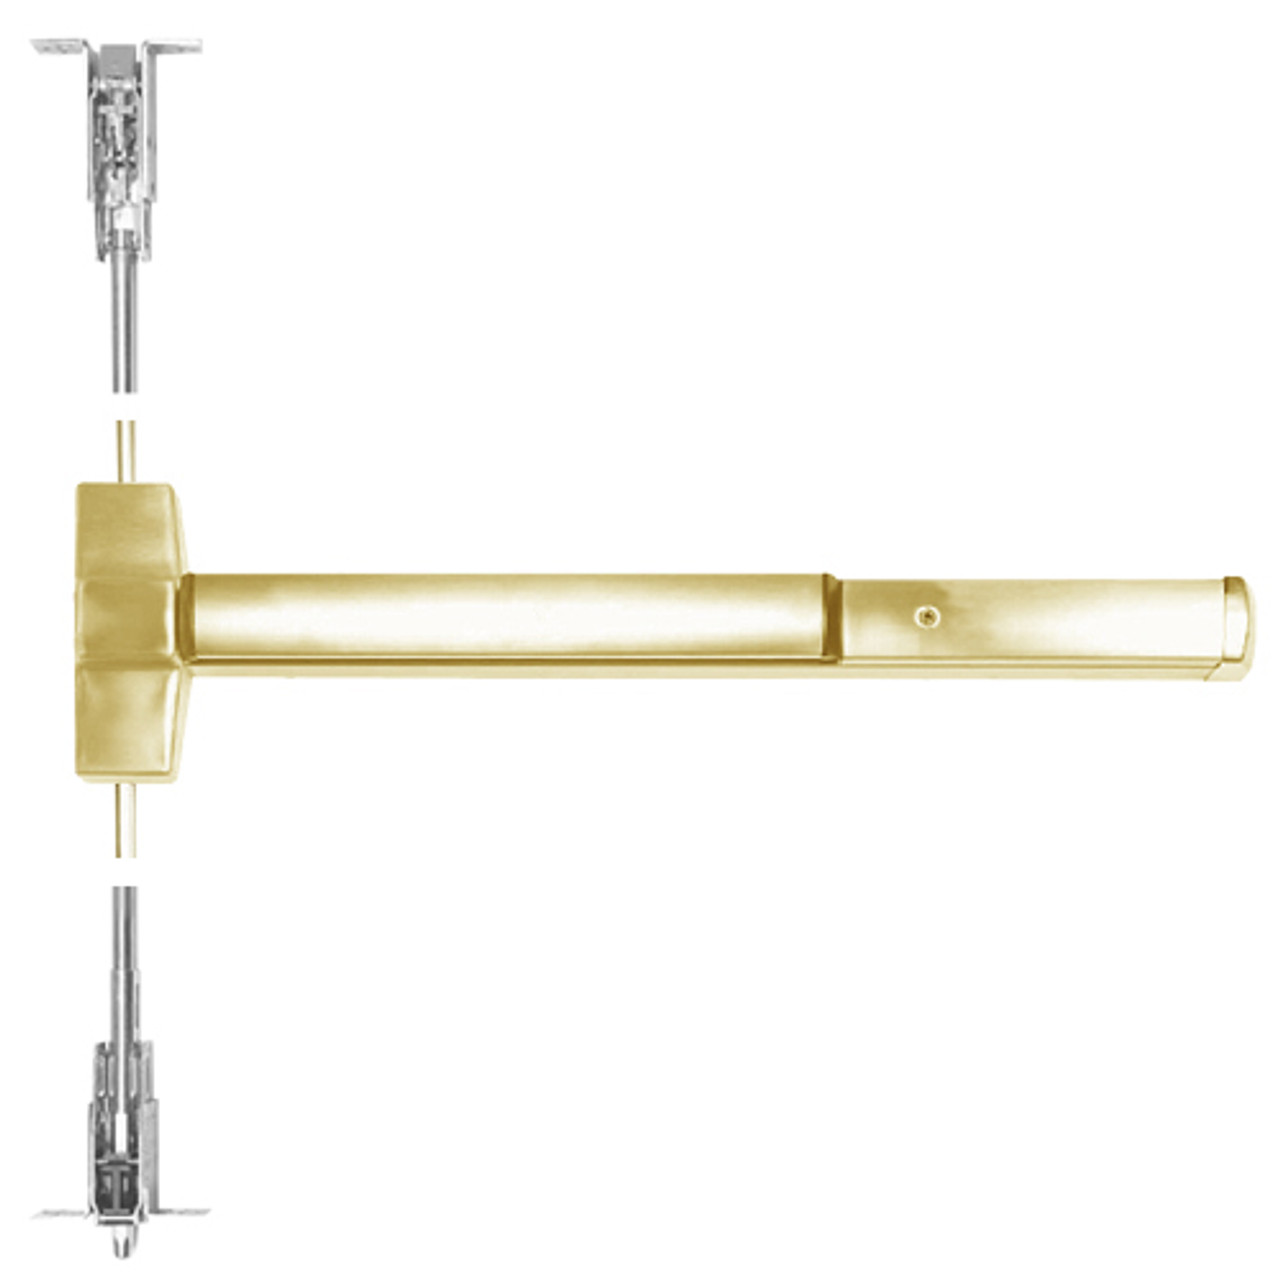 ED5800-606-W048-M92 Corbin ED5800 Series Non Fire Rated Concealed Vertical Rod Device with Touchbar Monitoring in Satin Brass Finish